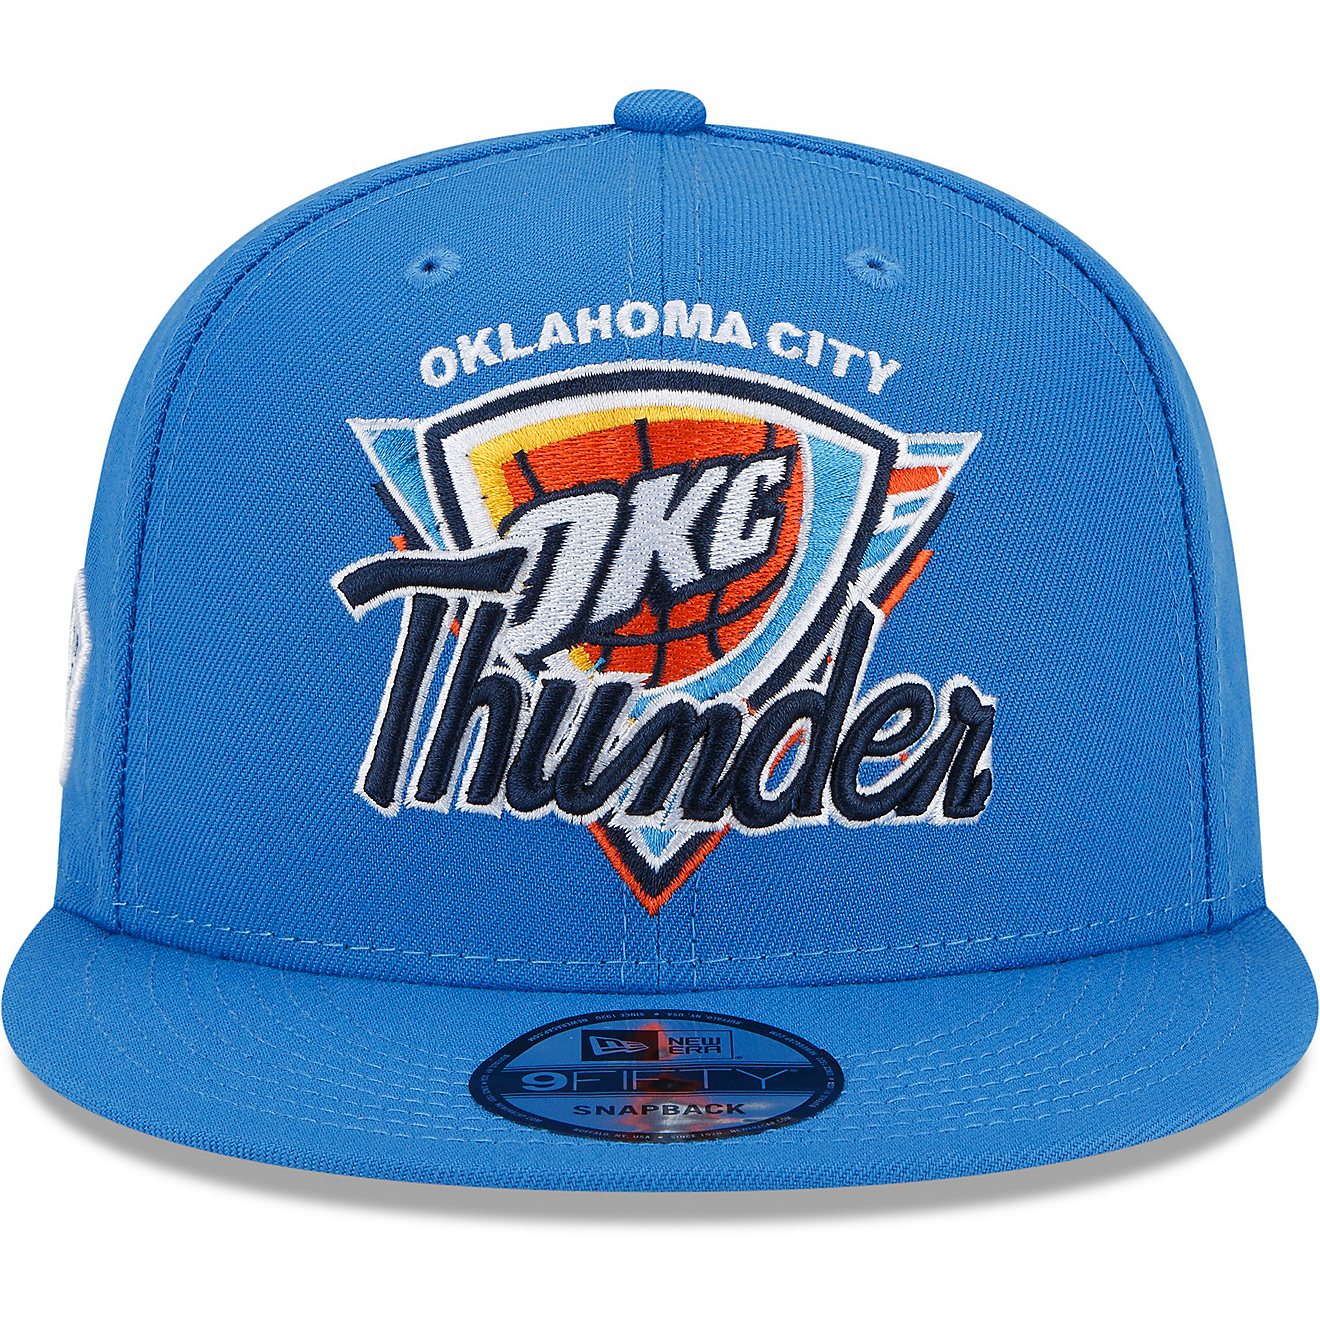 New Era Men's Oklahoma City Thunder '21 Tip Off 9FIFTY Cap                                                                       - view number 3